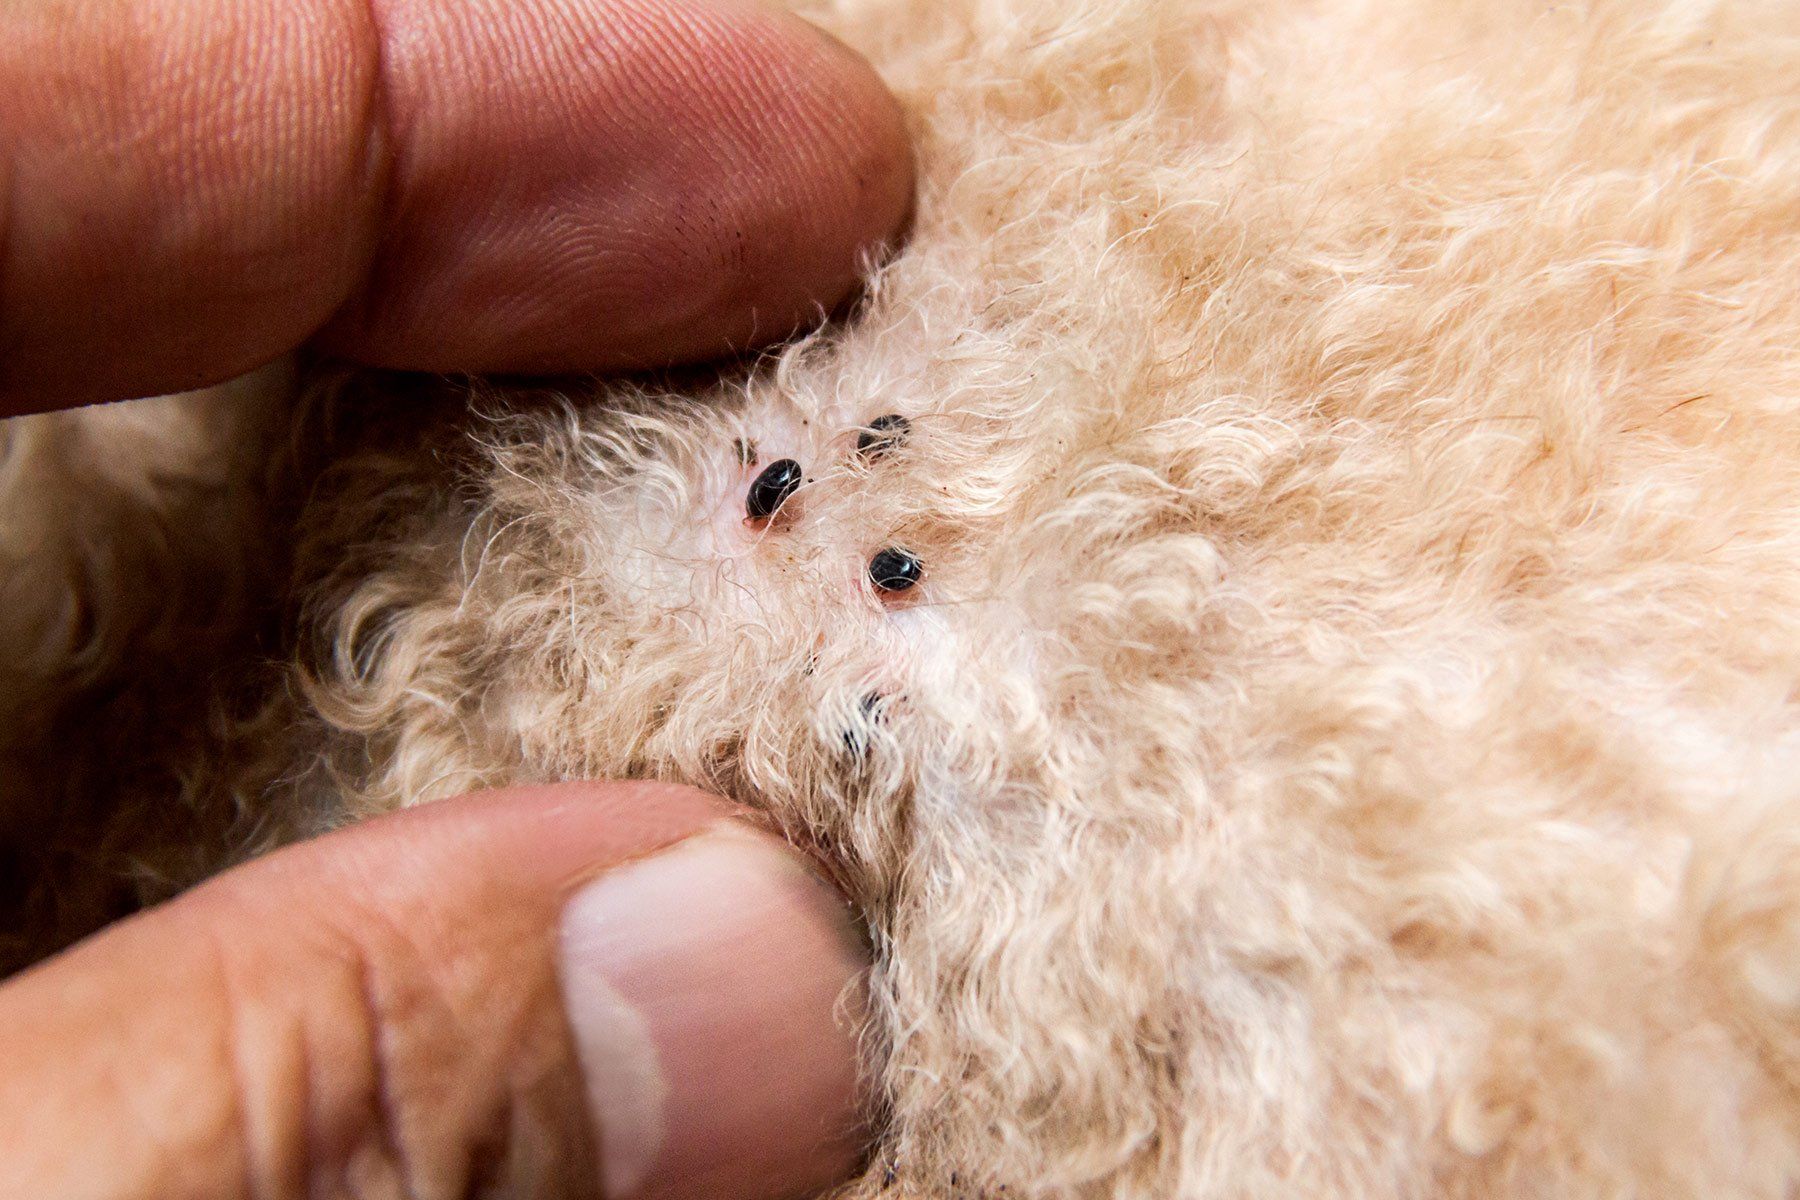 A person is holding a dog 's fur with ticks on it.